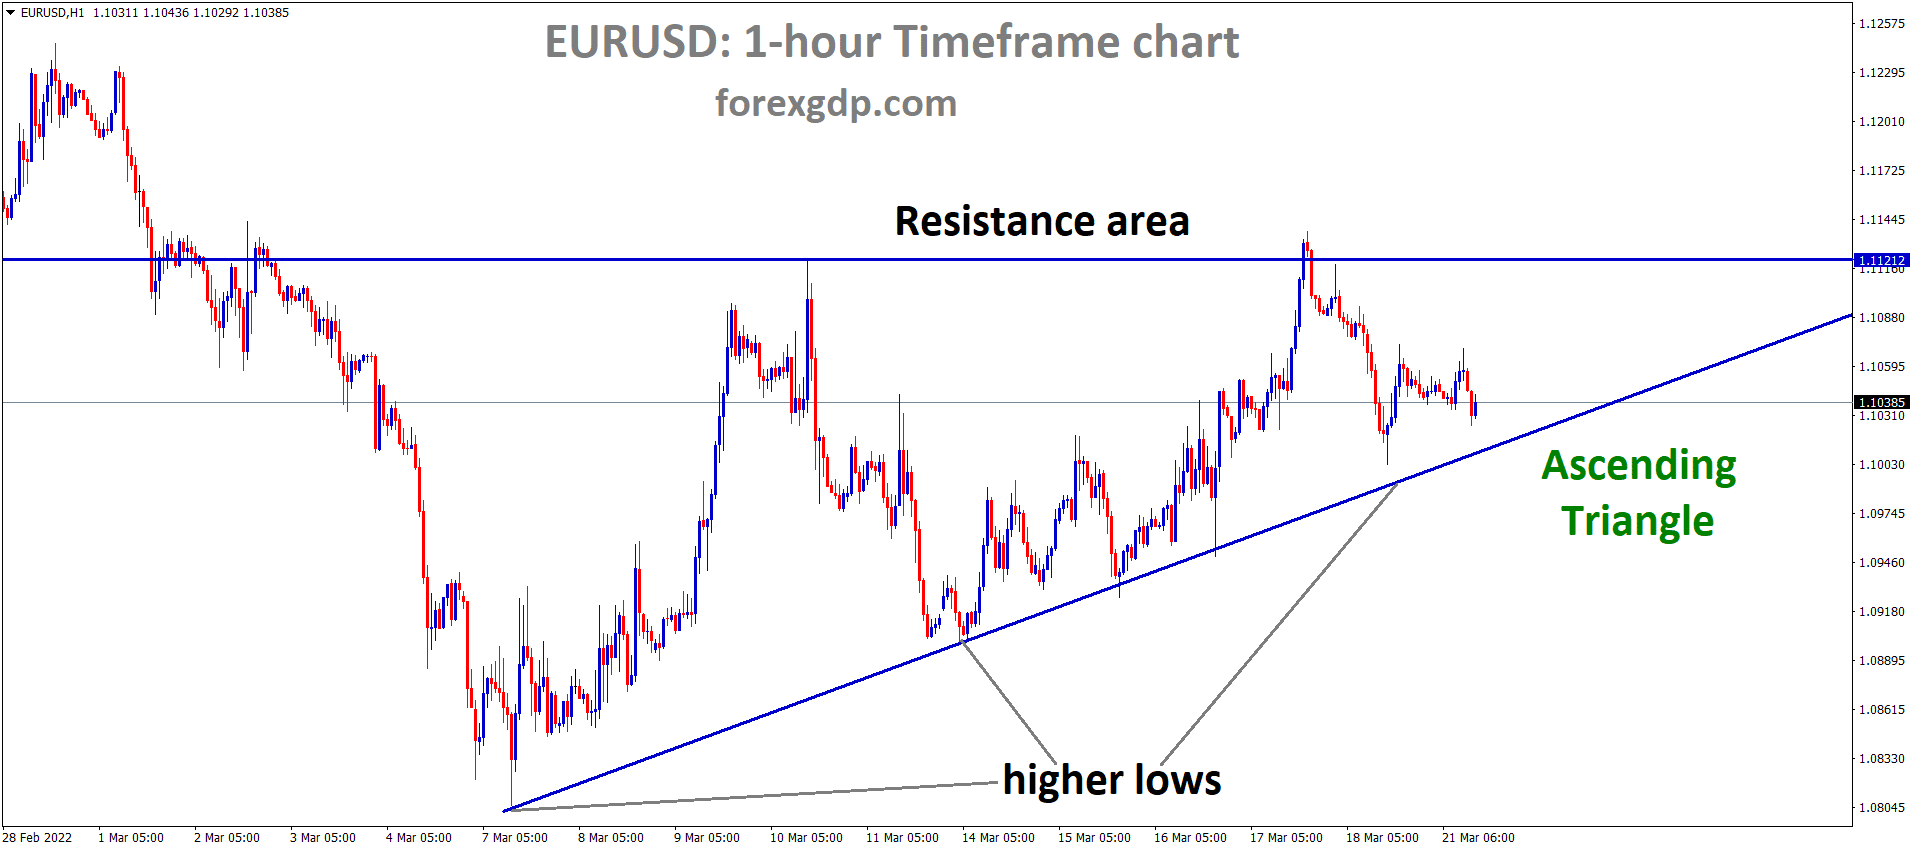 EURUSDH1Market has reached the higher low area of the Ascending triangle pattern